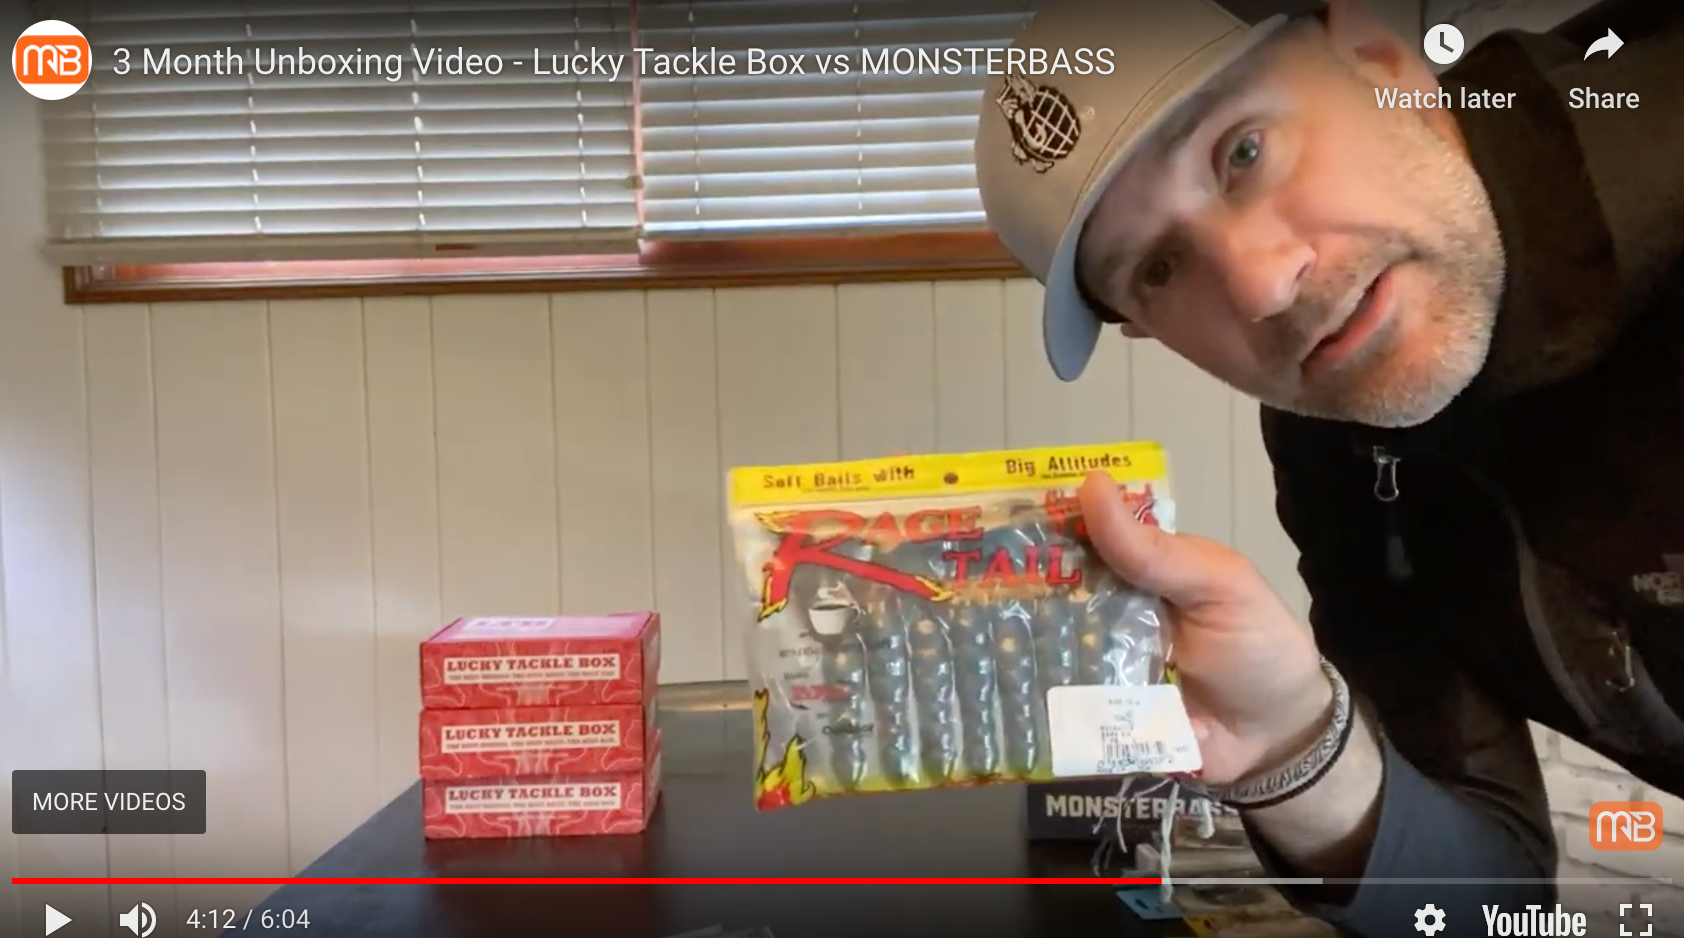 3 Month Unboxing - MONSTERBASS & Lucky Tackle Box